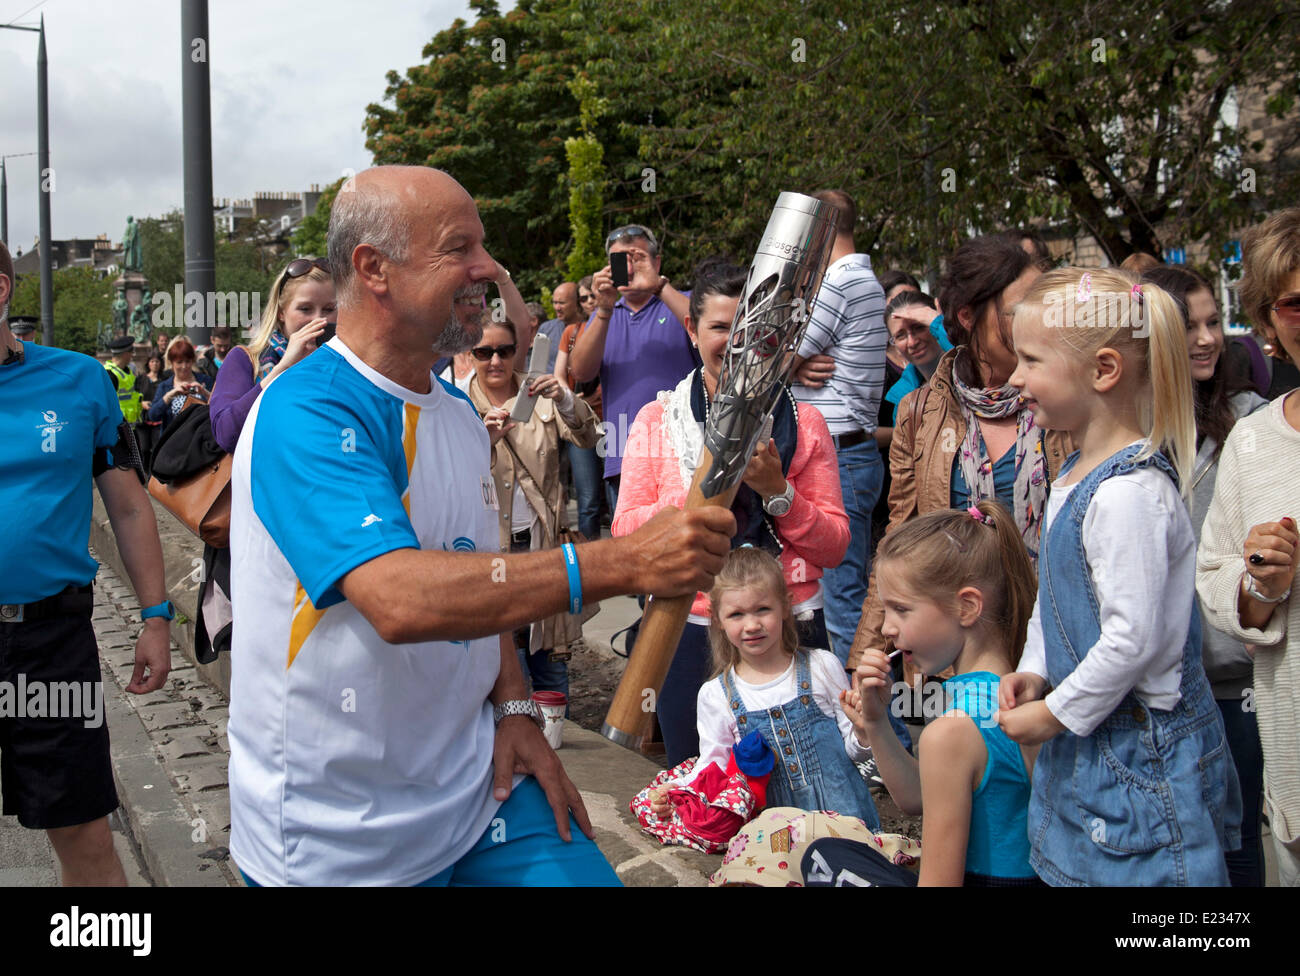 Edinburgh, Scotland, UK. 14th June 2014.  Queen's Baton Relay arrives in Edinburgh by Tram and Michael Laing spreads Commonwealth Games fever as he shows the baton to those lining the streets before it is passed on and weaves its way through the capital city's streets. Gavin Hastings former Scotland Rugby captain looks to the heavens in the Royal Mile. Credit:  Arch White/Alamy Live News Stock Photo